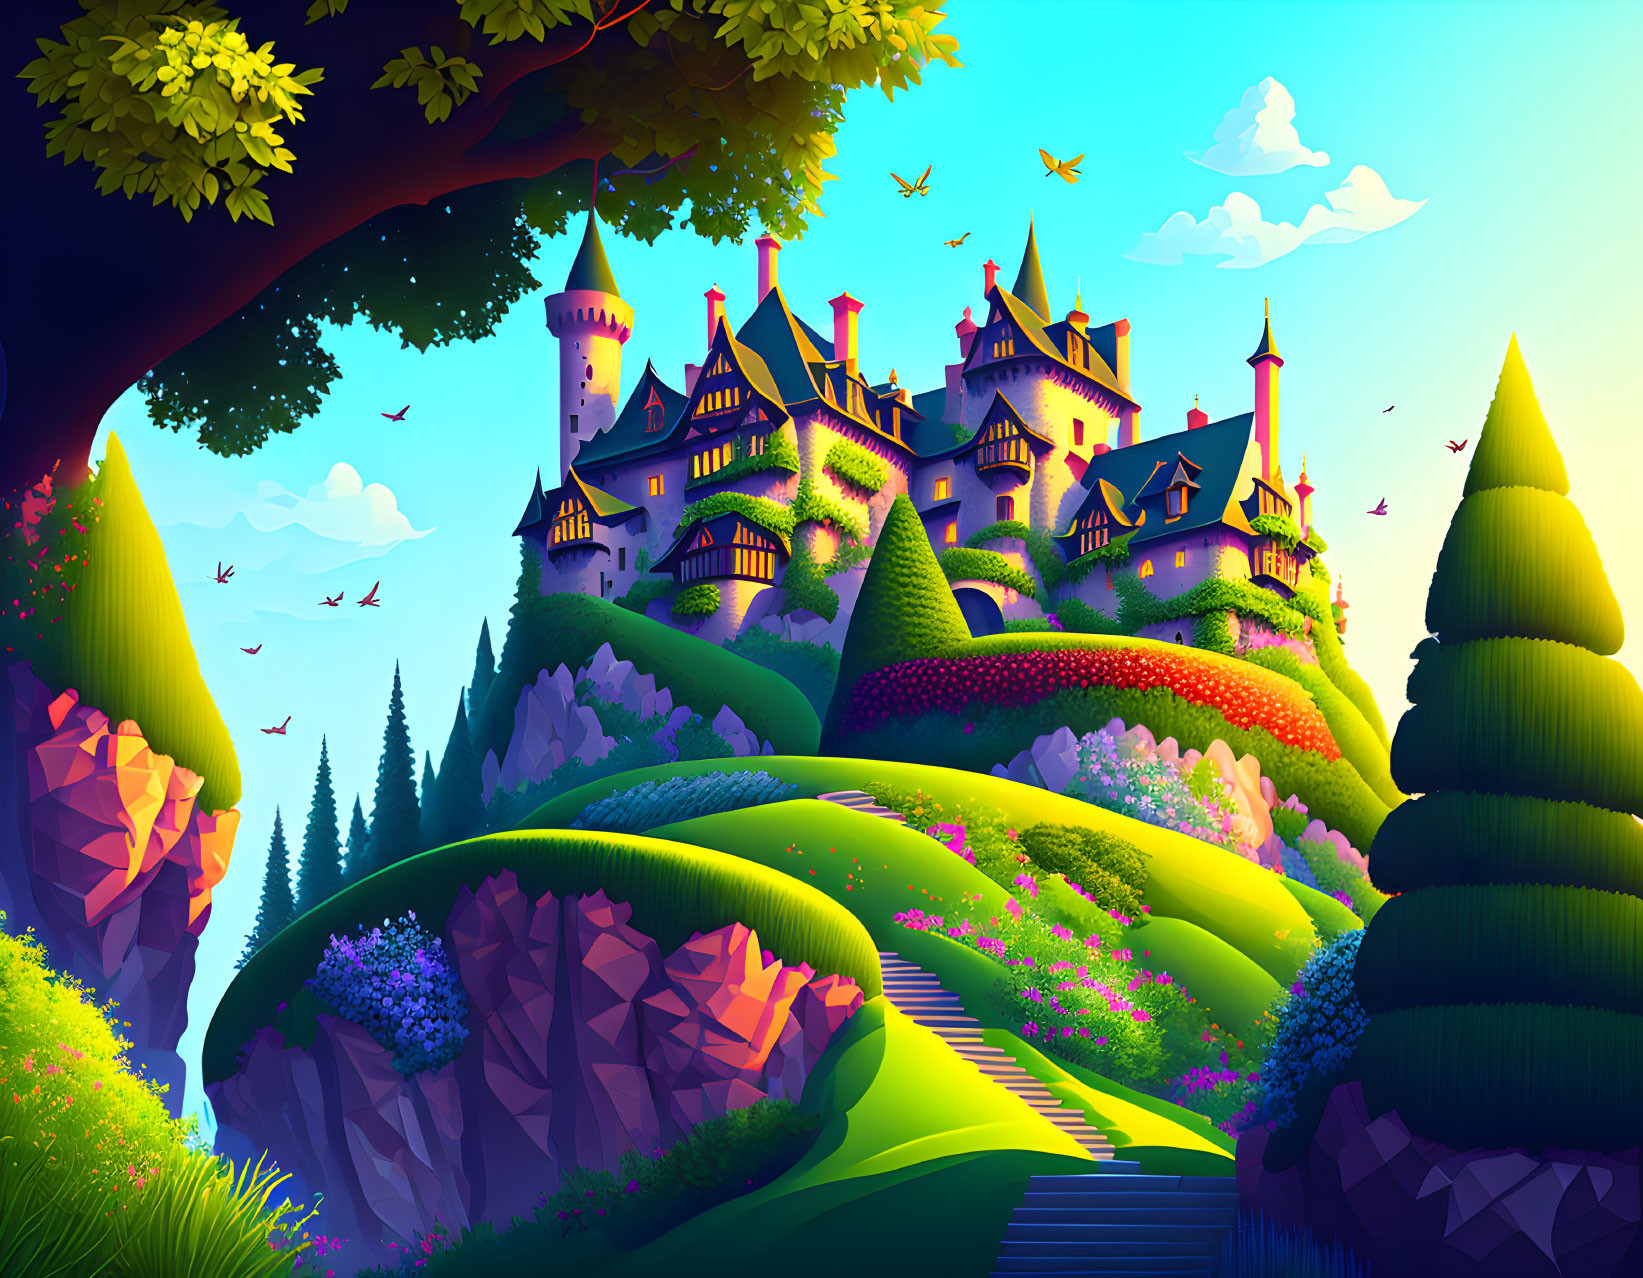 Fantasy castle on green hills with stone stairs and flying birds